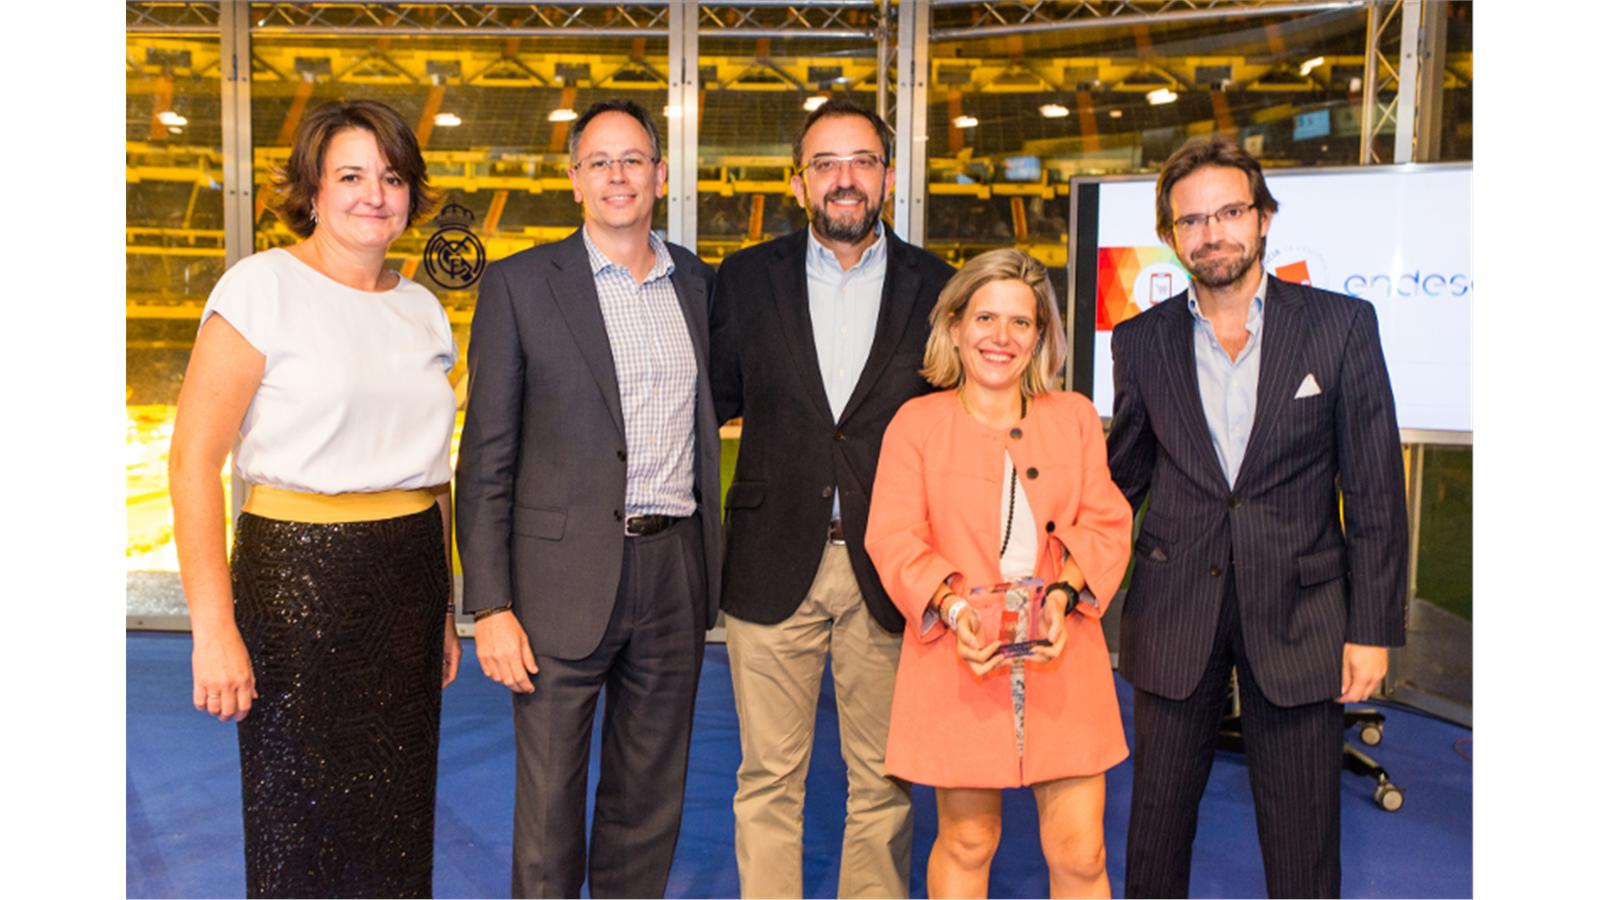 Endesa awarded CRC Gold Award for best Ecommerce strategy by Spanish Association of Experts in customer relations (AEERC) 